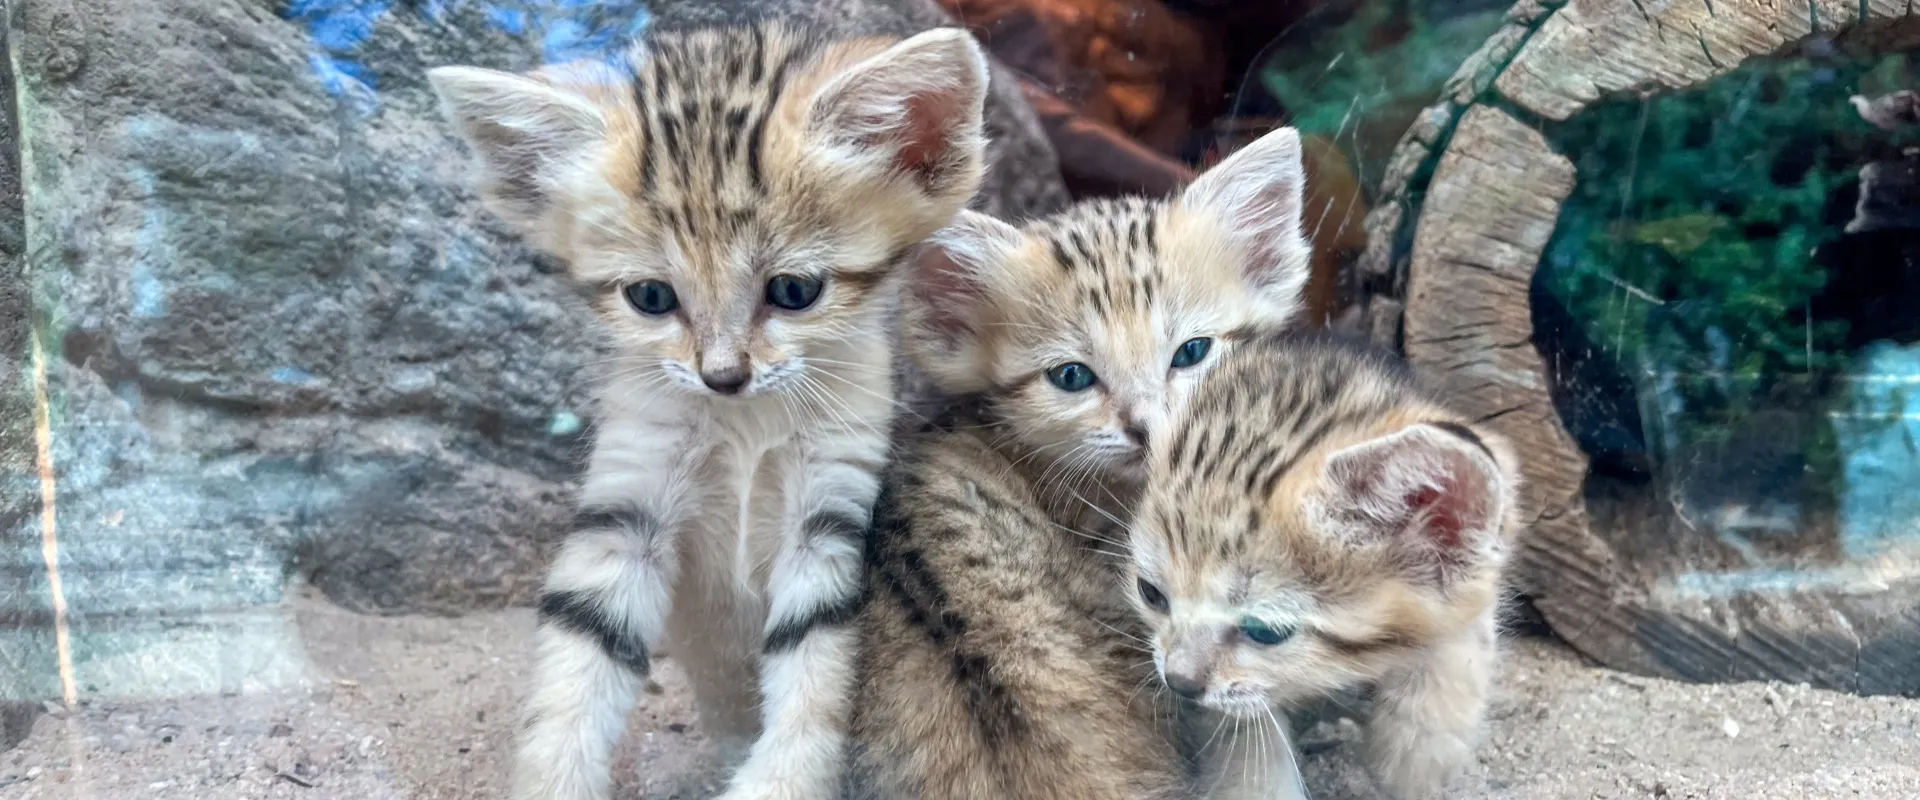 North Carolina Zoo Asks Public to Vote on Names of Sand Cat Triplets